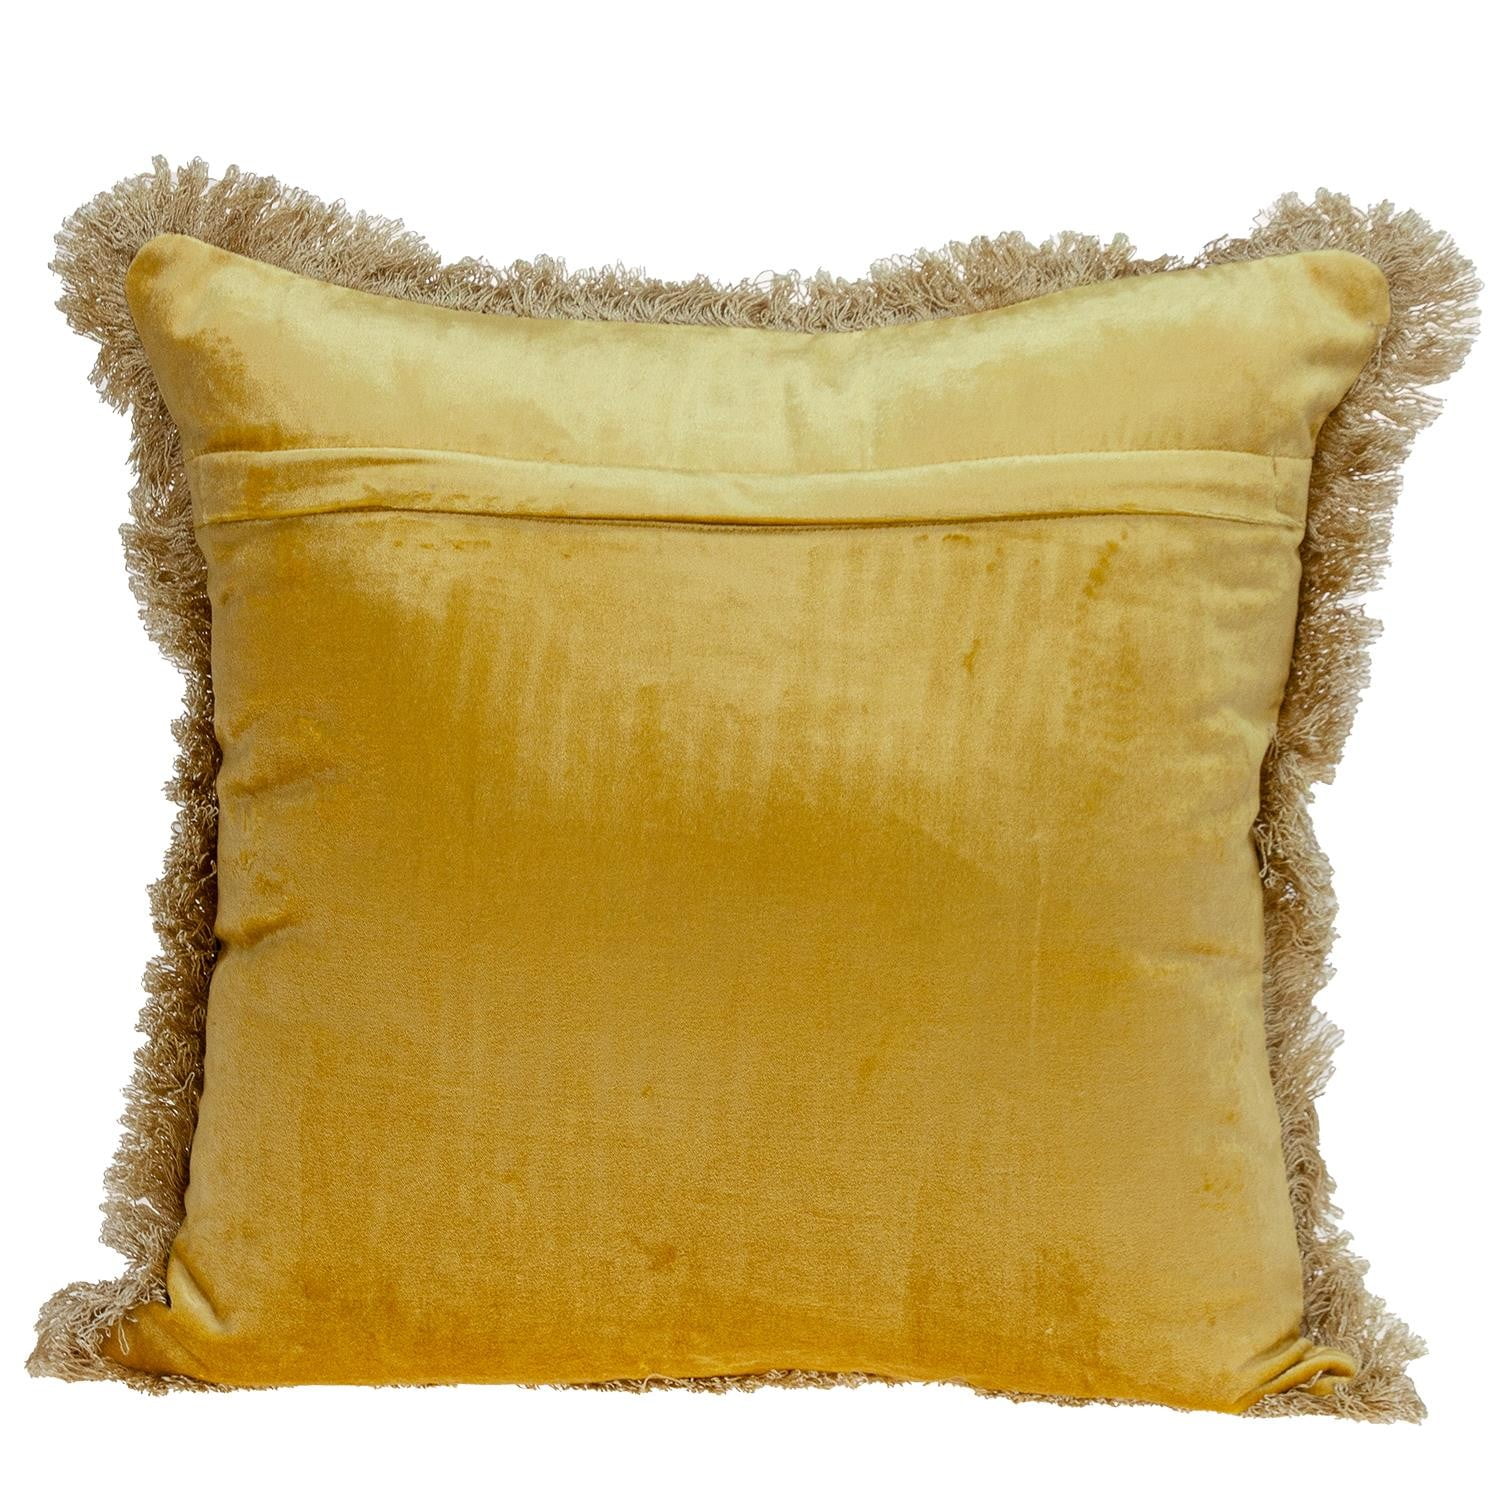 DriftAway Boho Throw Pillow Covers Decorative Square Home Cushion Velvet  Tassels 2 Pieces 18 inch by 18 inch Solid Gold Yellow 